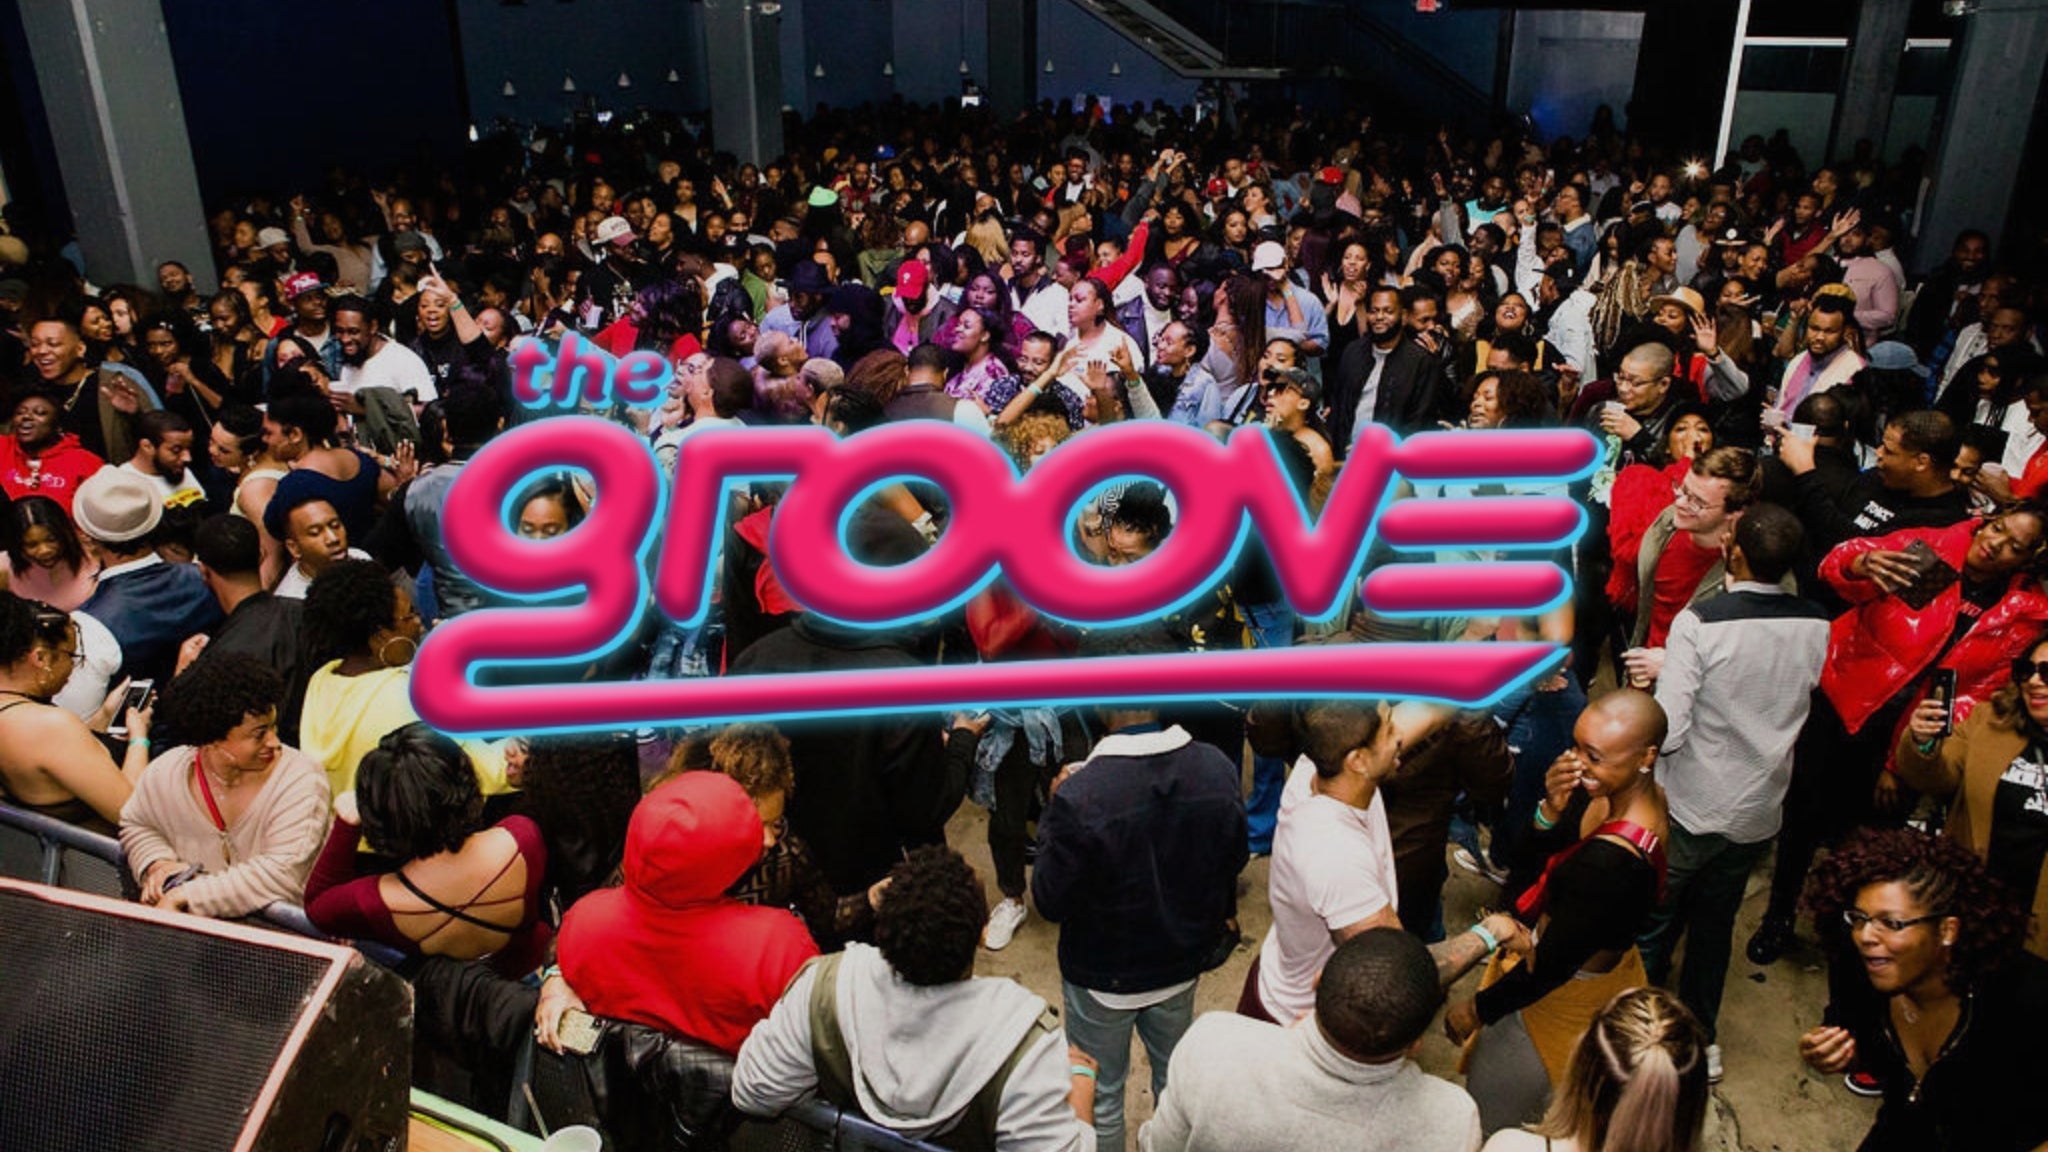 The Groove R&B All Night  in Atlanta promo photo for Advance Tier 2 presale offer code